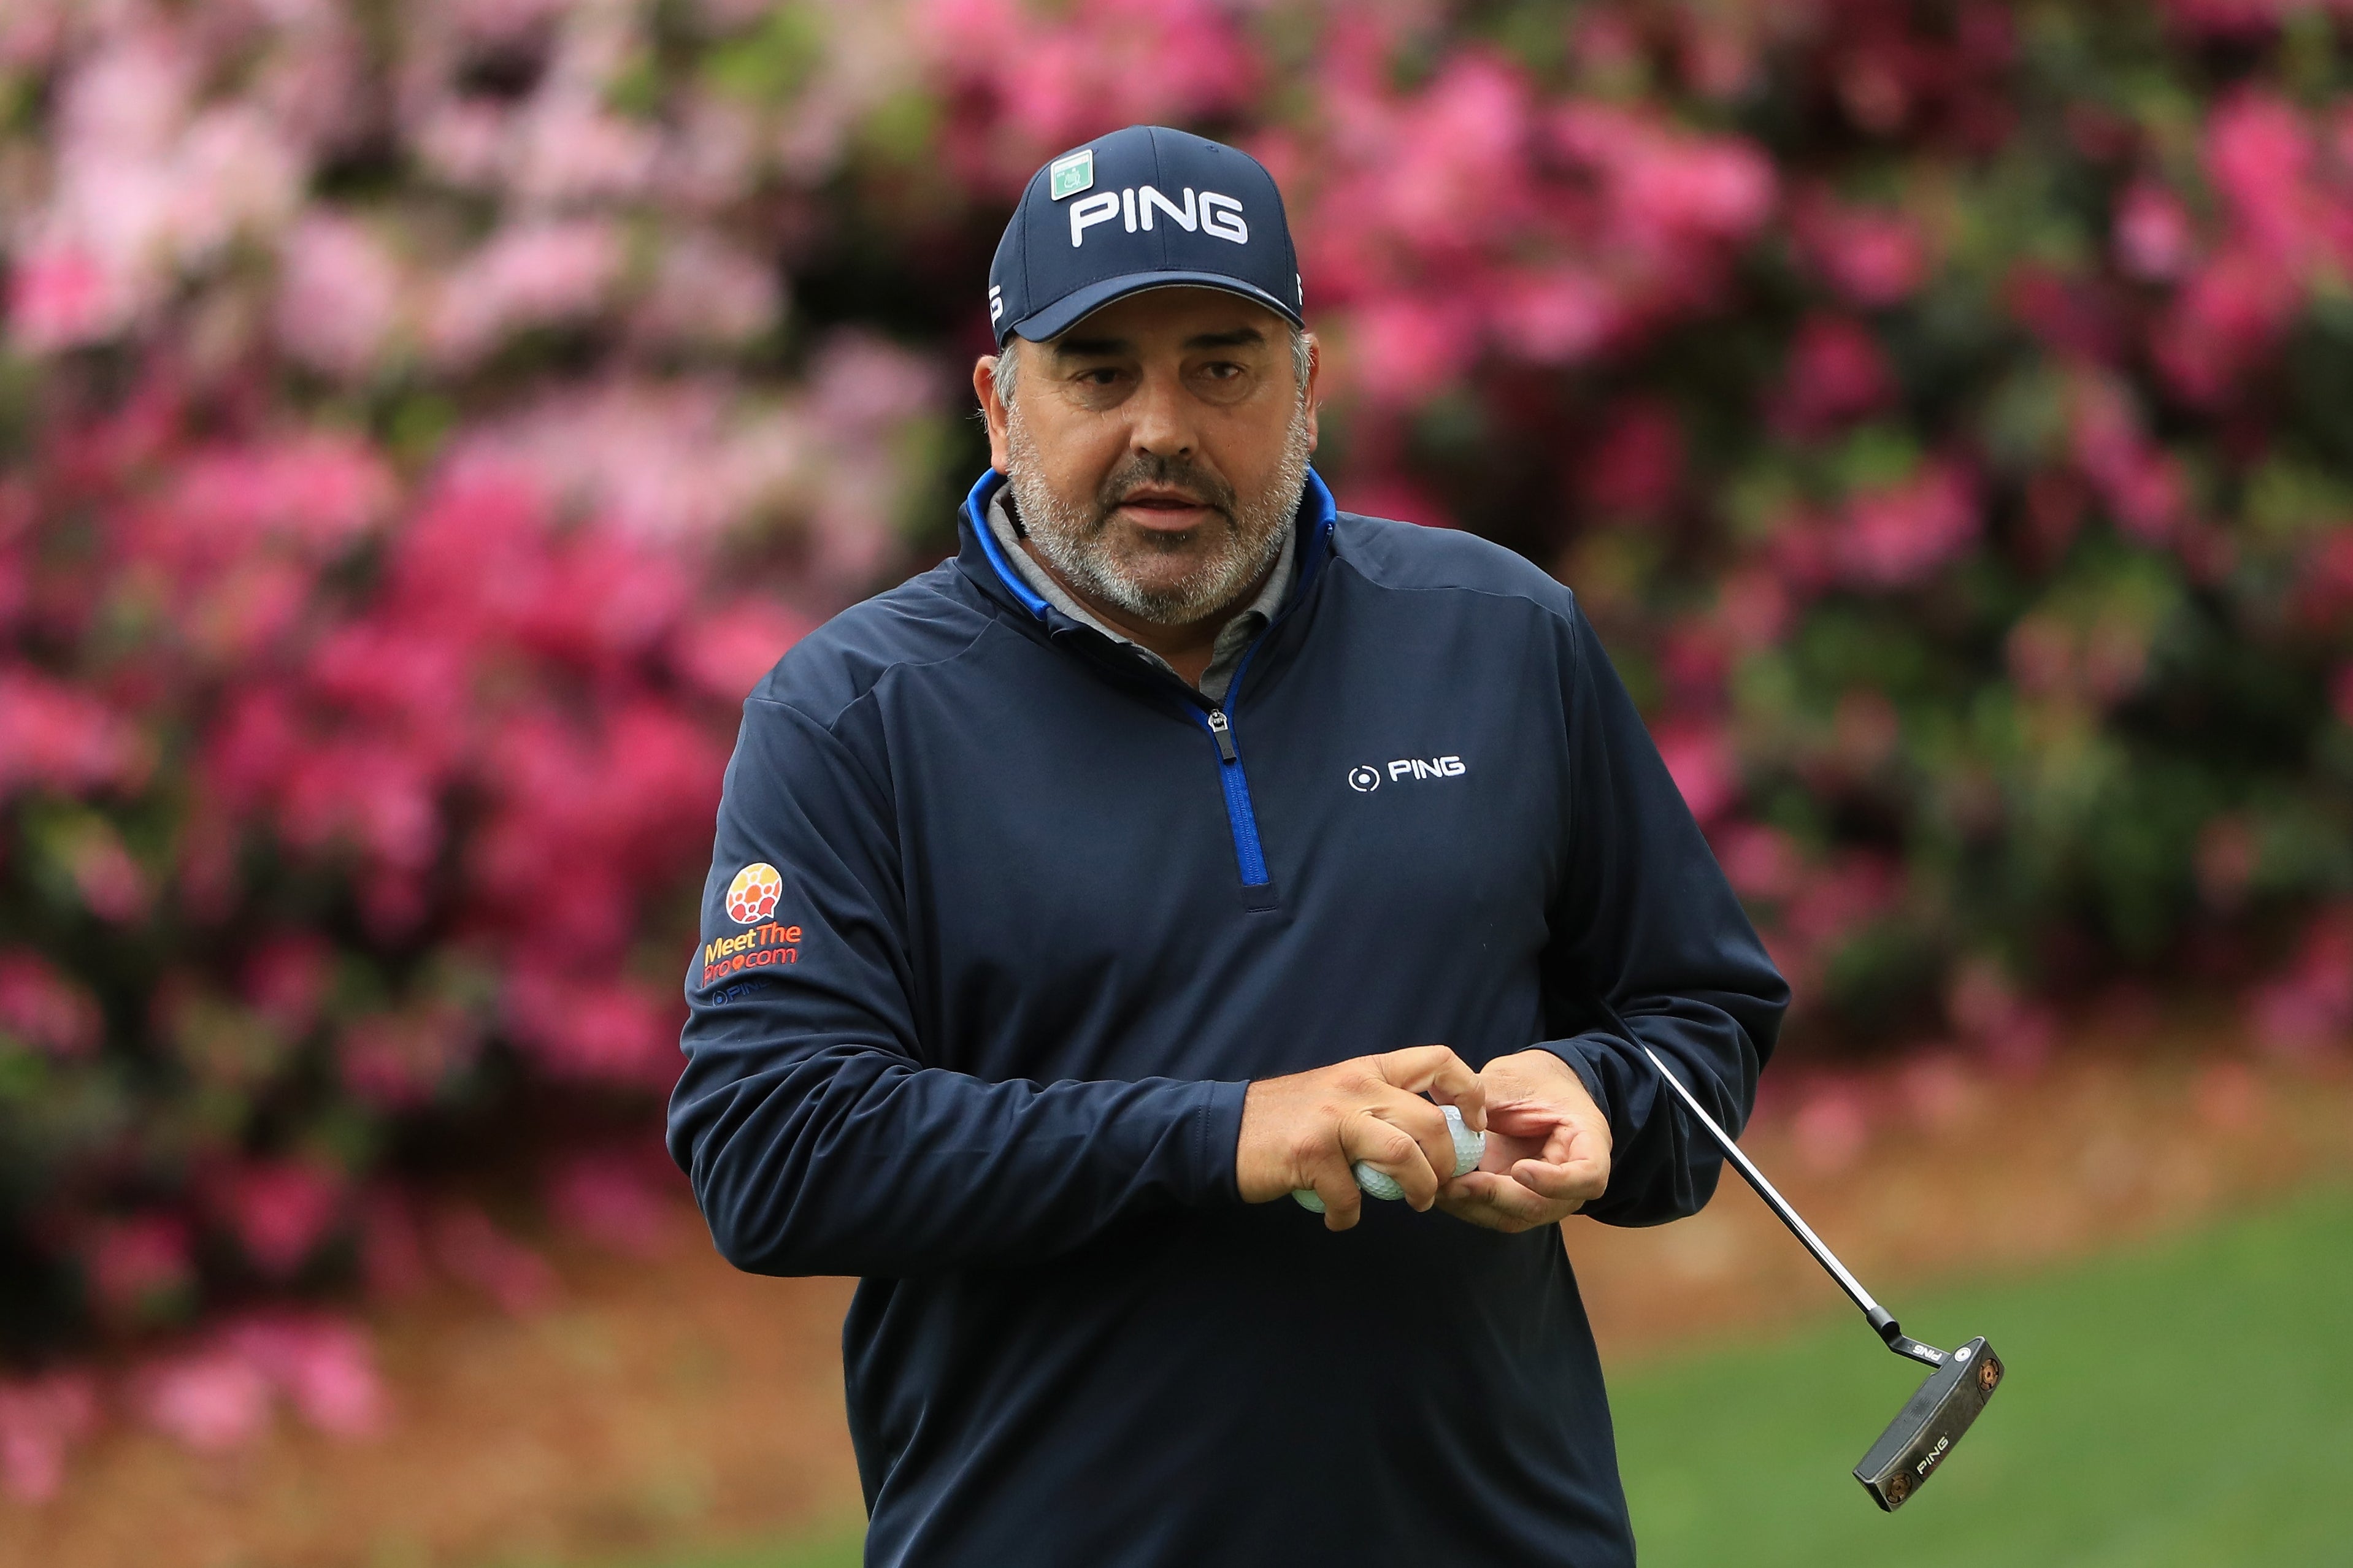 Angel Cabrera was arrested in January 2021 and subsequently convicted of two charges of assault